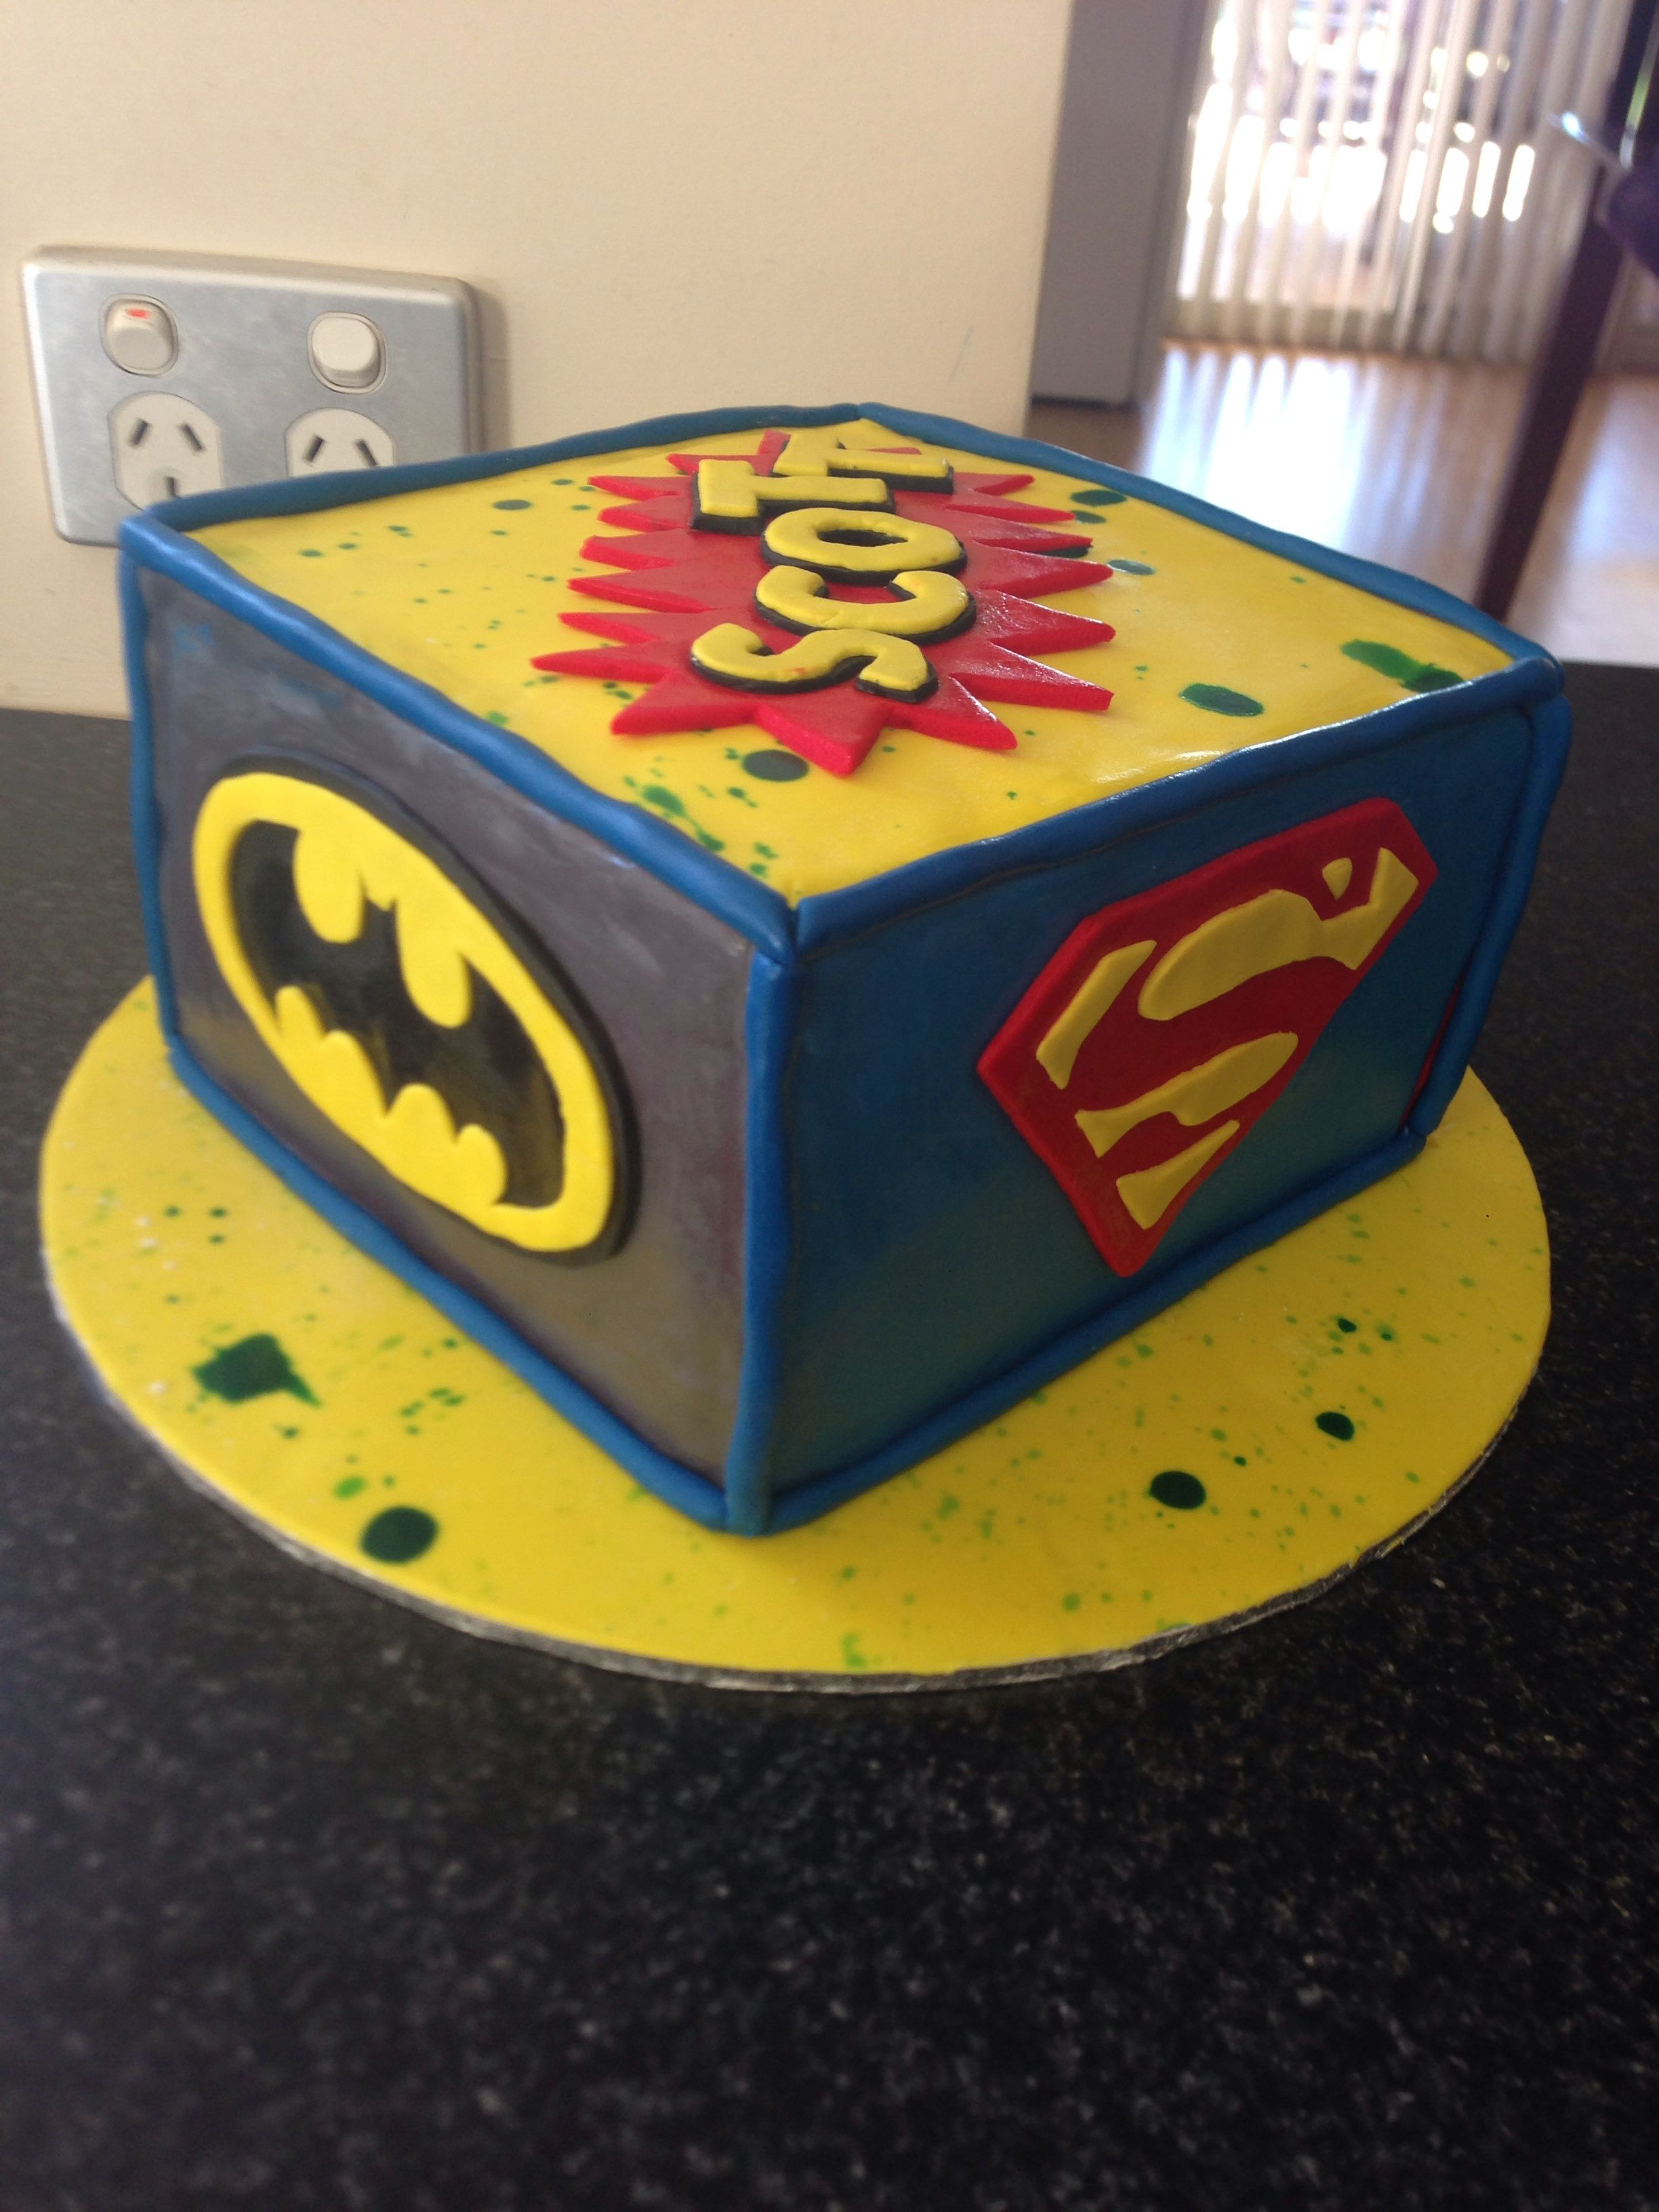 6 Year Old Boy Birthday Gift Ideas
 Super hero cake for 6 year old boy My cakes